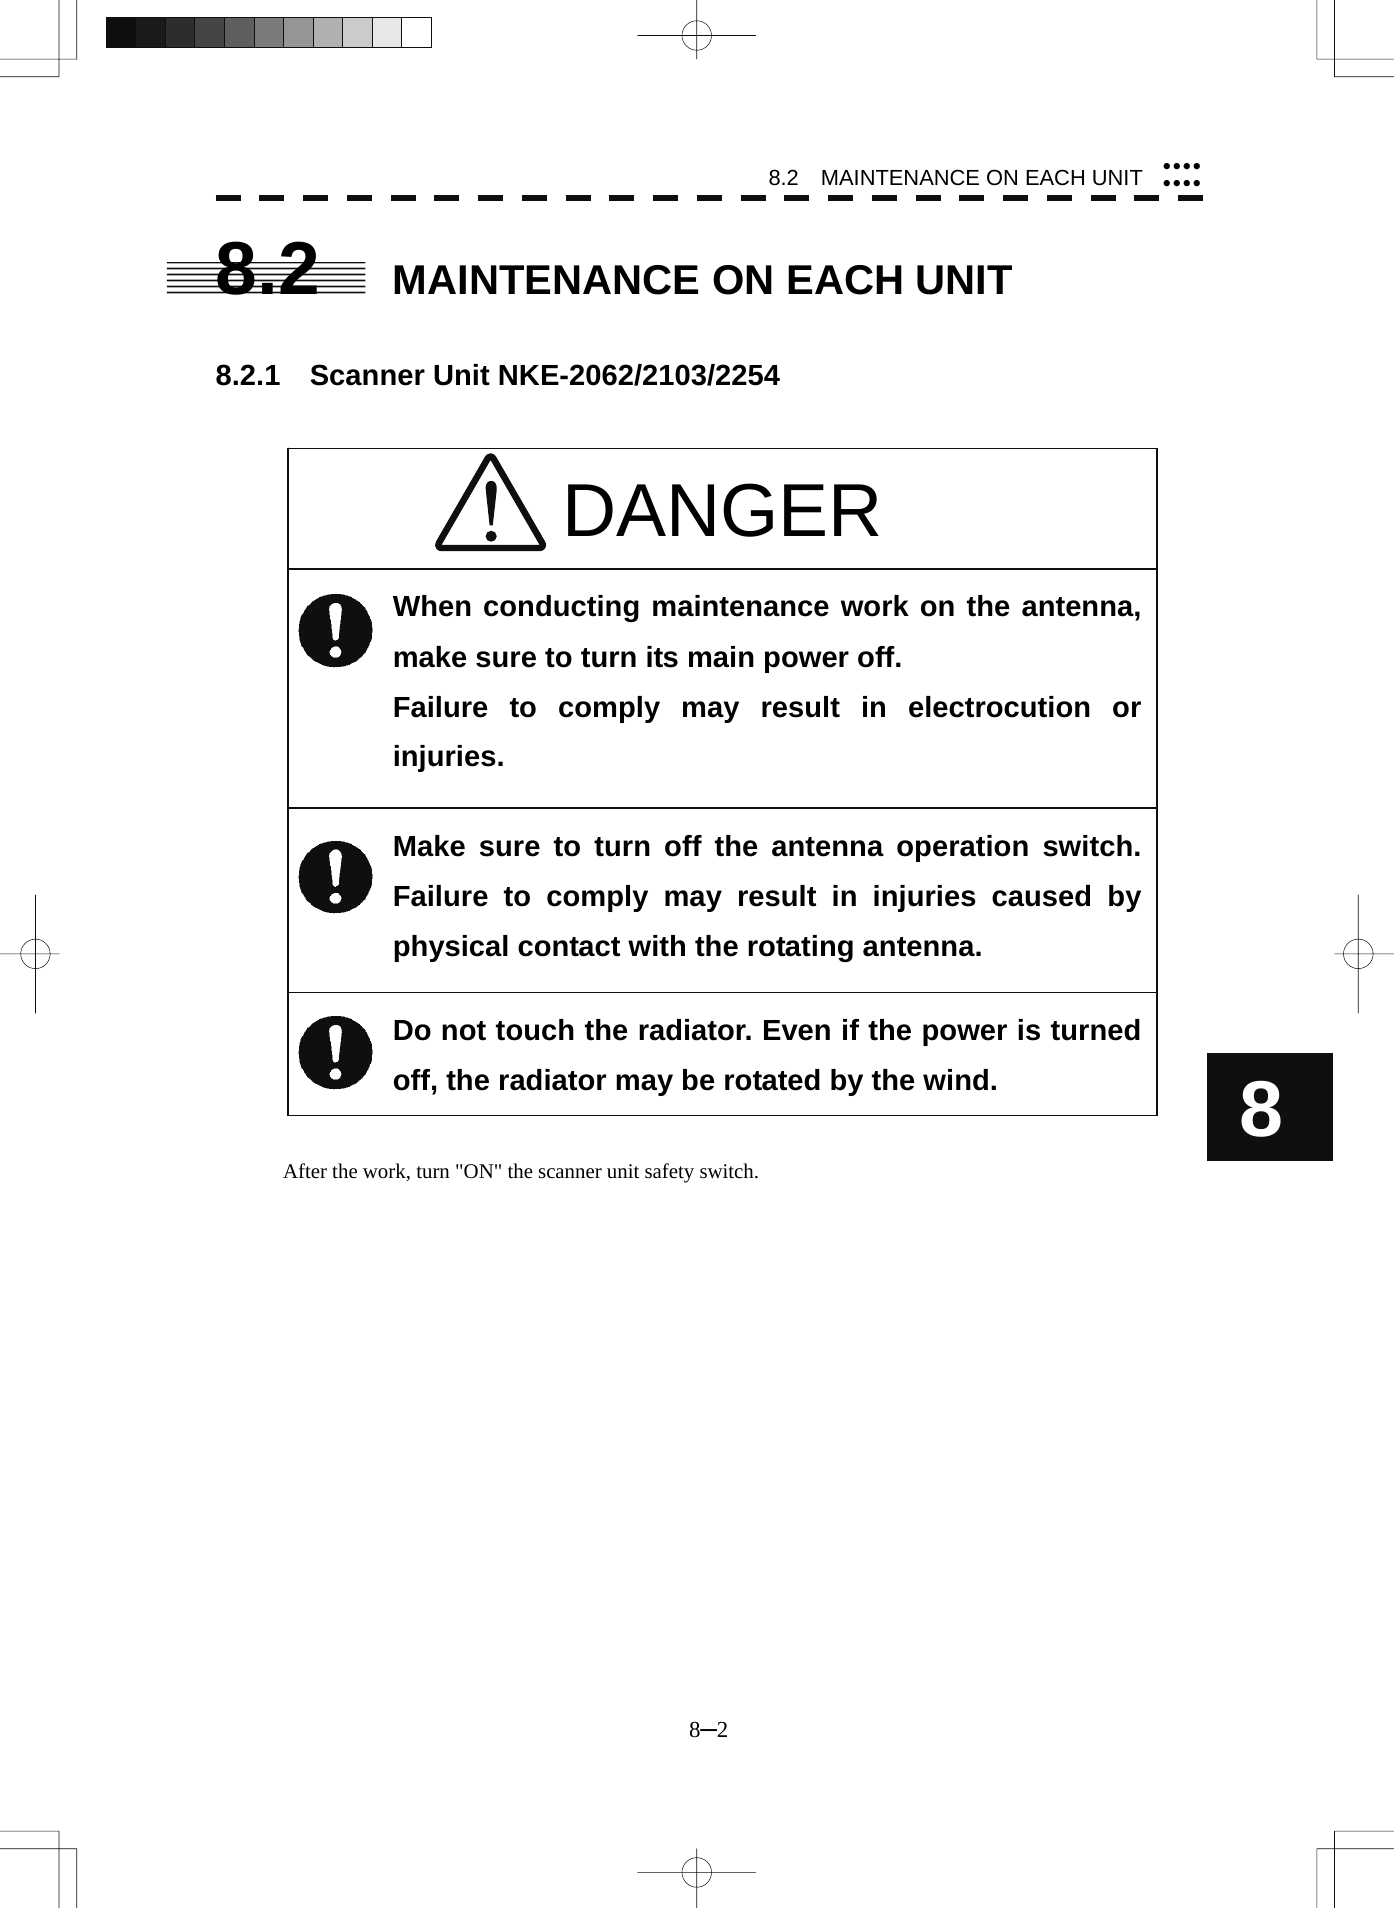 8.2    MAINTENANCE ON EACH UNIT 8─2 8yyyyyyyy8.2  MAINTENANCE ON EACH UNIT   8.2.1  Scanner Unit NKE-2062/2103/2254                                 After the work, turn &quot;ON&quot; the scanner unit safety switch. DANGER When conducting maintenance work on the antenna, make sure to turn its main power off. Failure to comply may result in electrocution or injuries. Make sure to turn off the antenna operation switch.  Failure to comply may result in injuries caused by physical contact with the rotating antenna. Do not touch the radiator. Even if the power is turned off, the radiator may be rotated by the wind. 